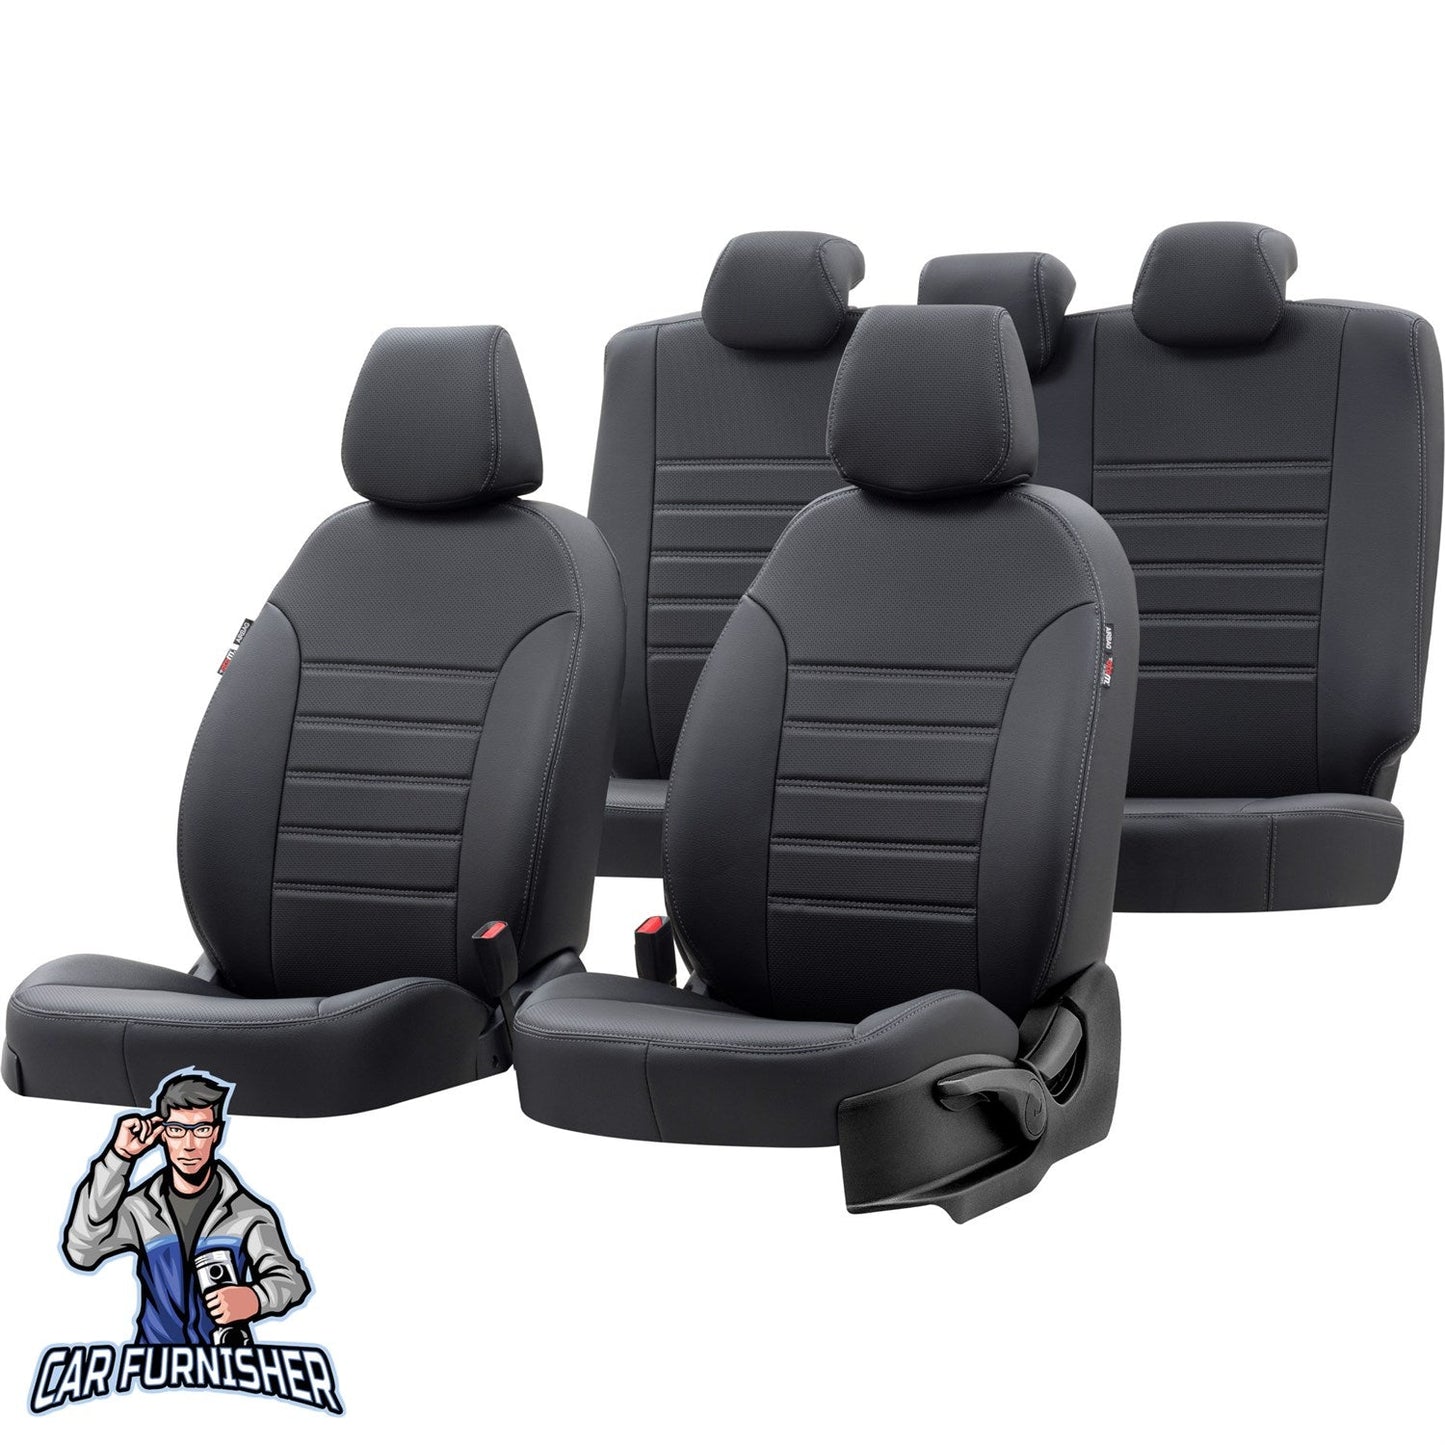 Volkswagen Golf Seat Cover New York Leather Design Black Leather